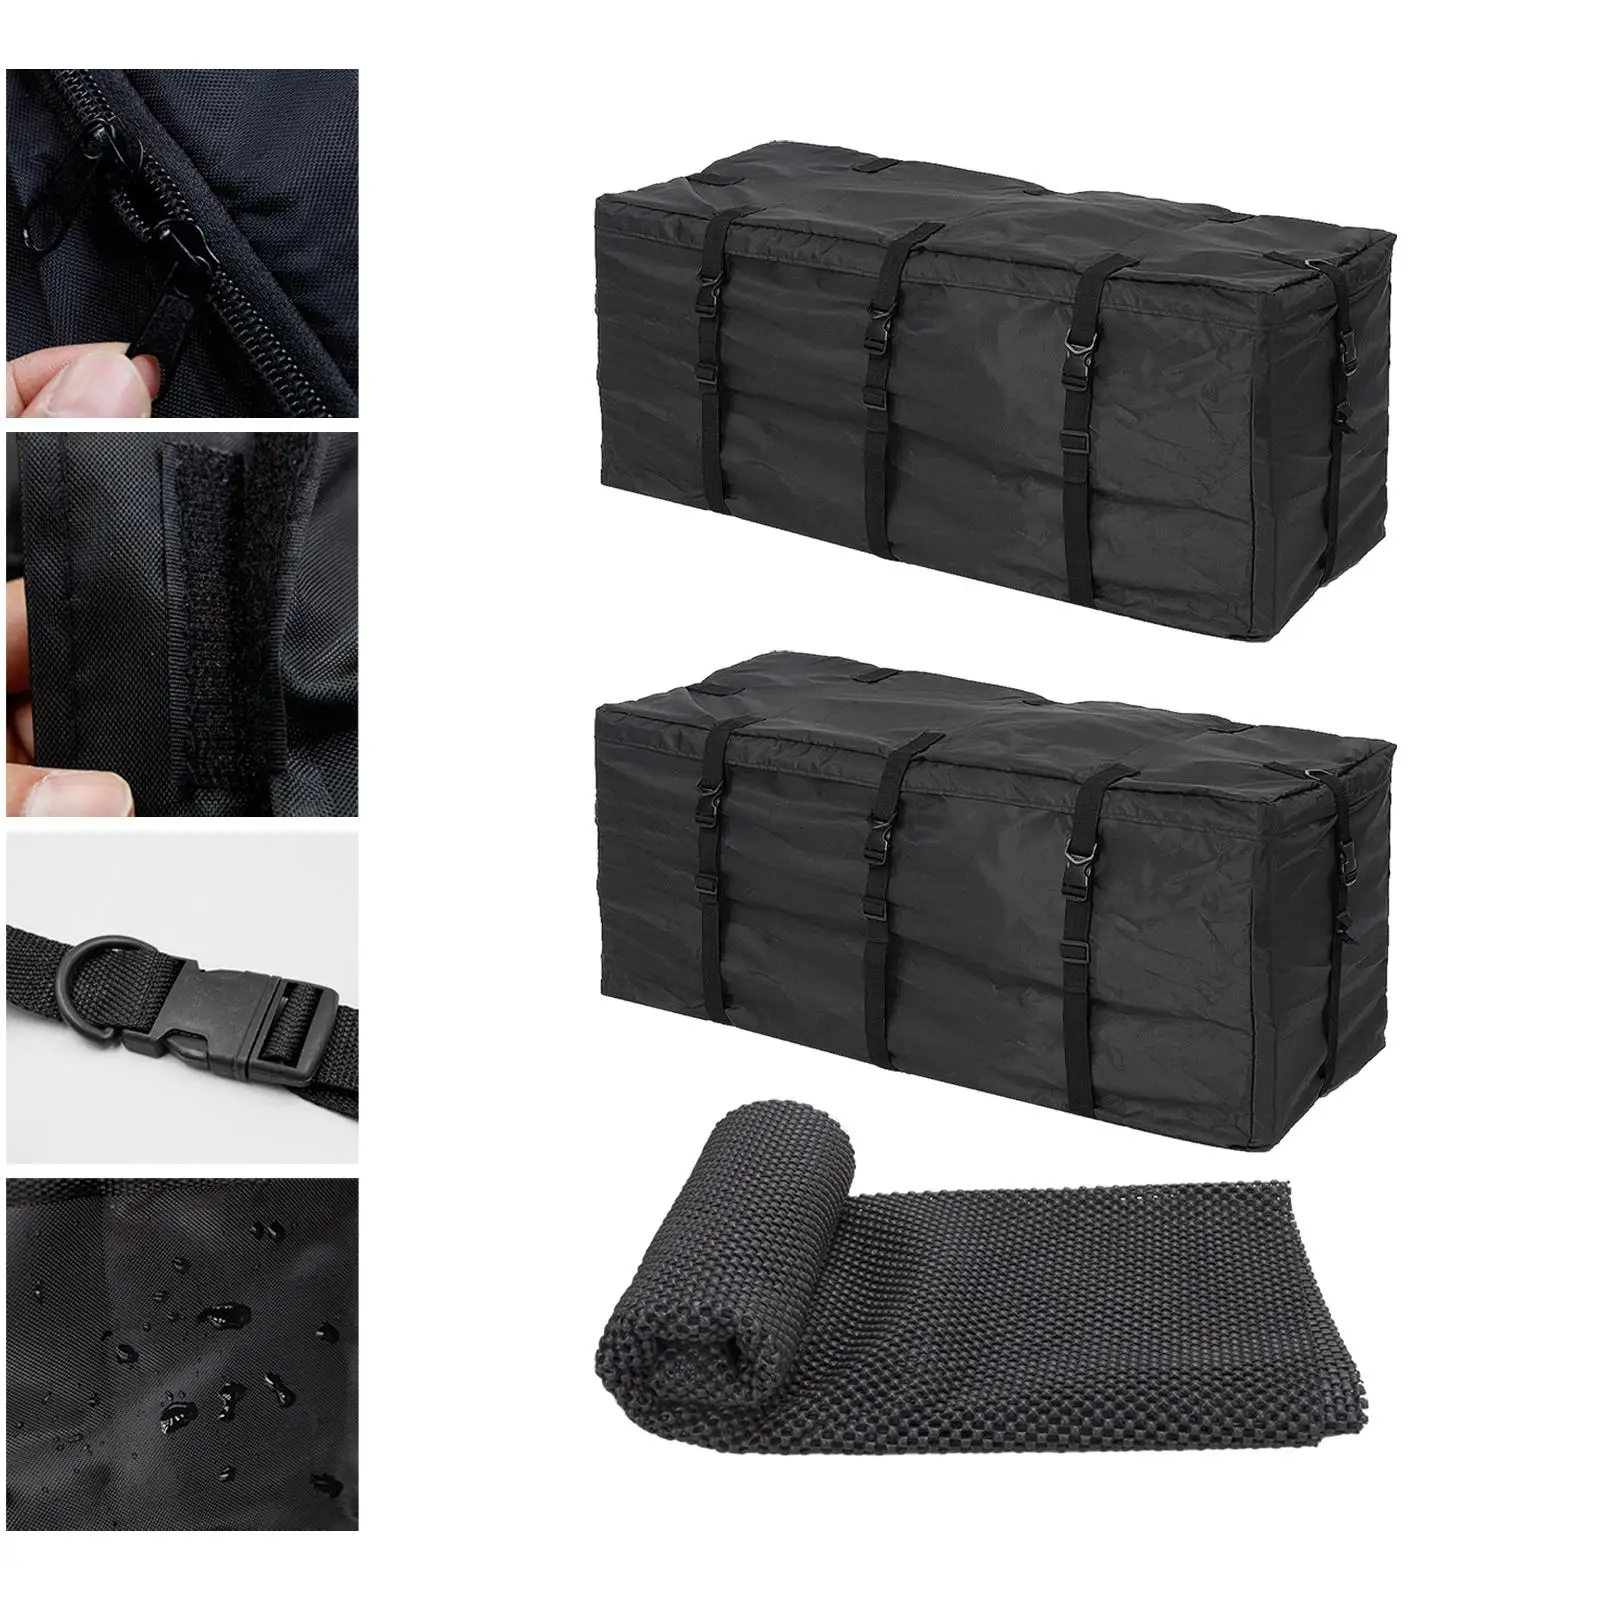 Car Rooftop Bag, Waterproof Rooftop Carrier Bag, Multipurpose Durable Car Roof Luggage Bag, for Cars SUV Vehicles